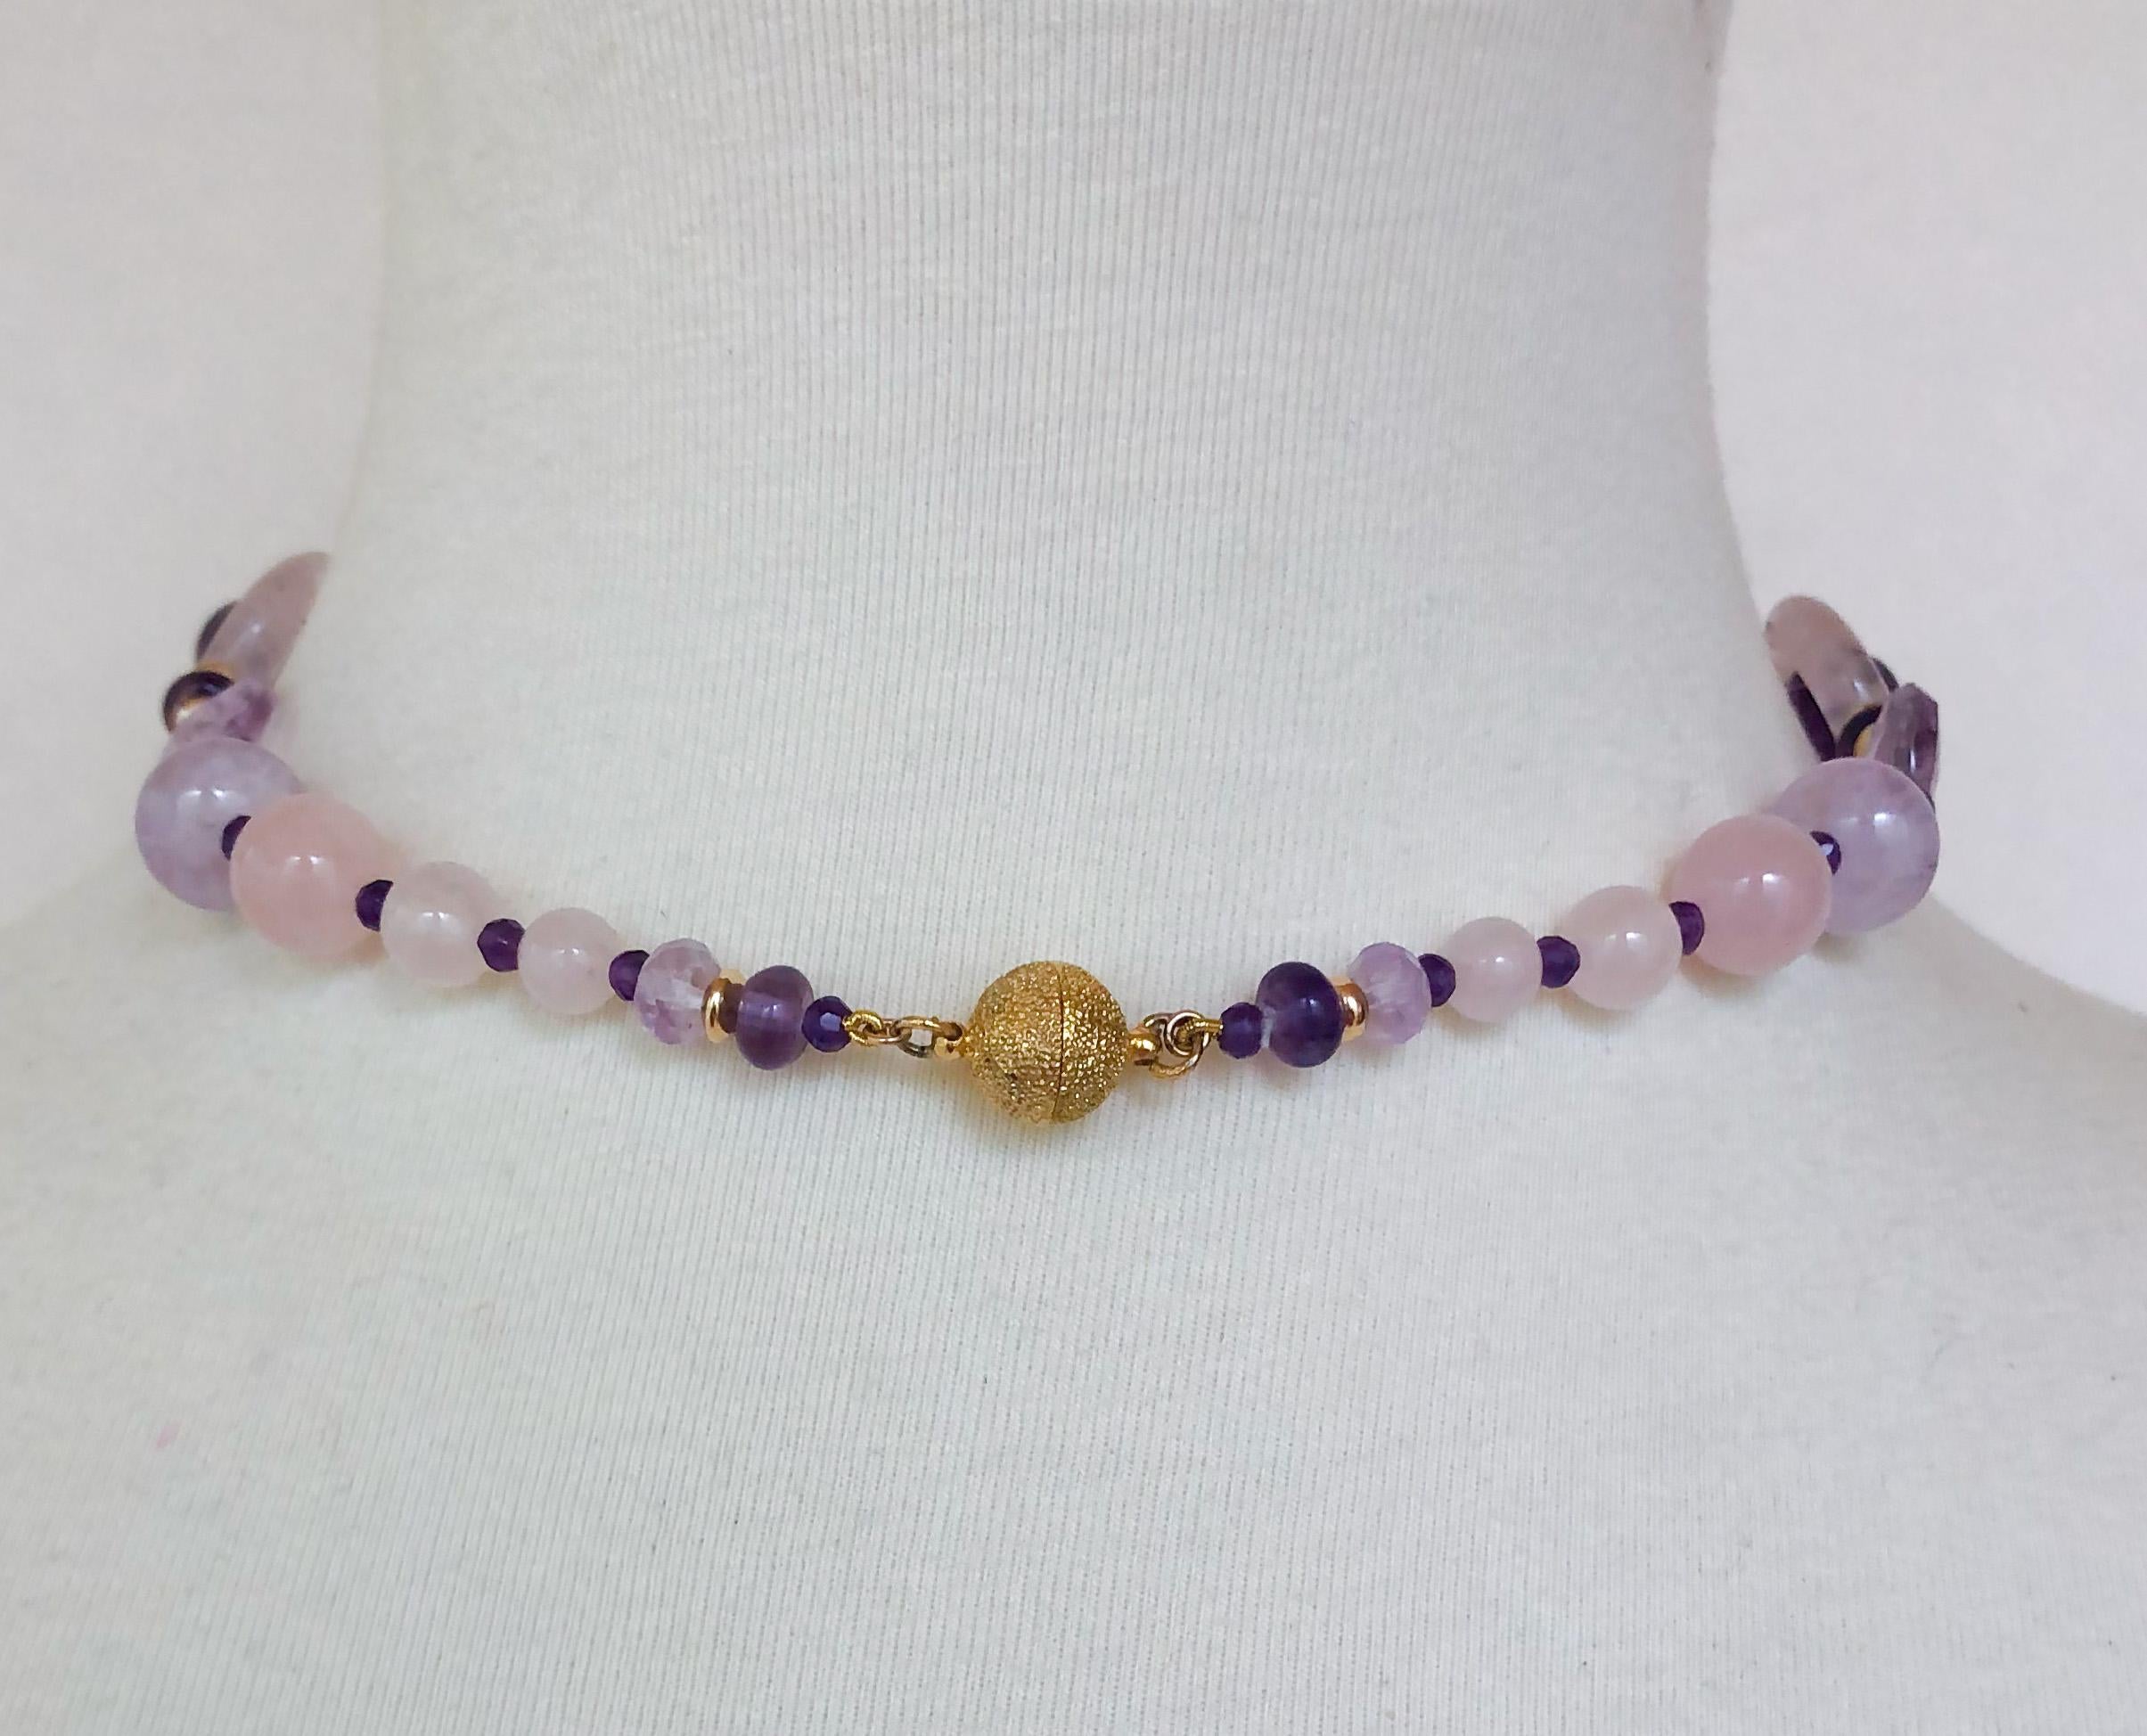 Artisan Marina J. Amethyst and Rose Quartz Necklace with Enamel Beads Pearls and Vermeil